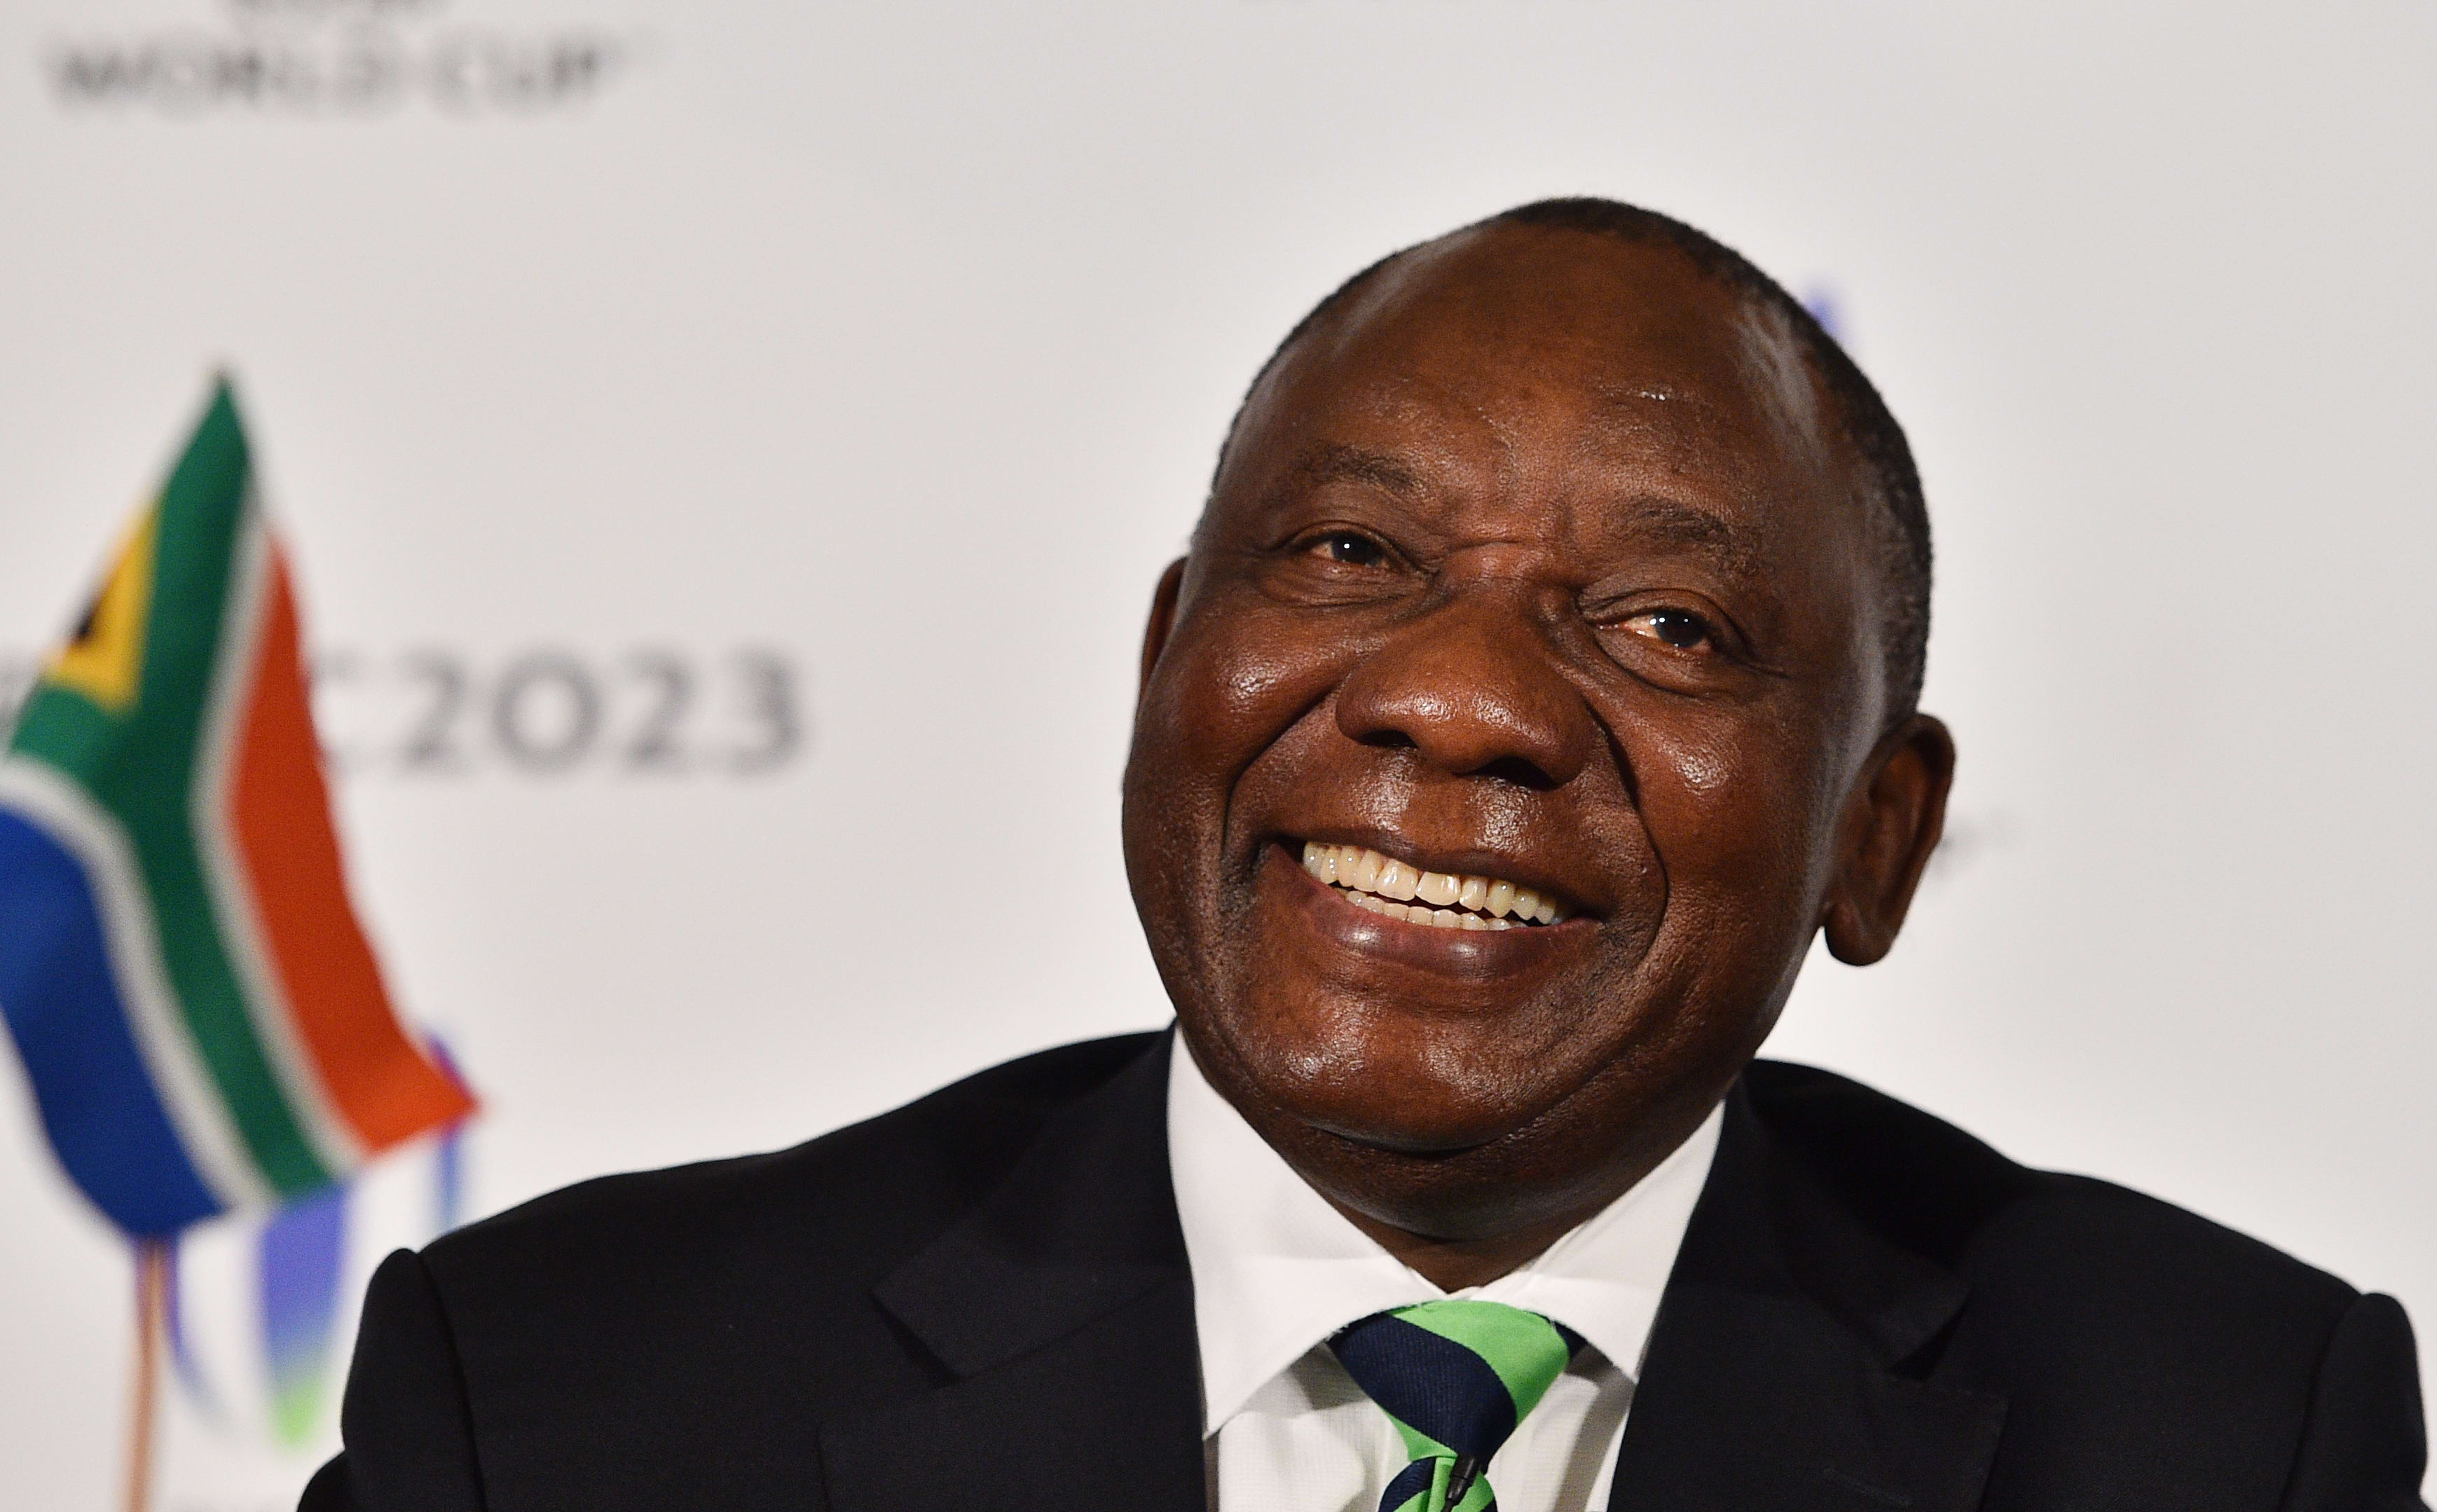 South Africa's deputy president Cyril Ramaphosa was narrowly elected ANC leader.